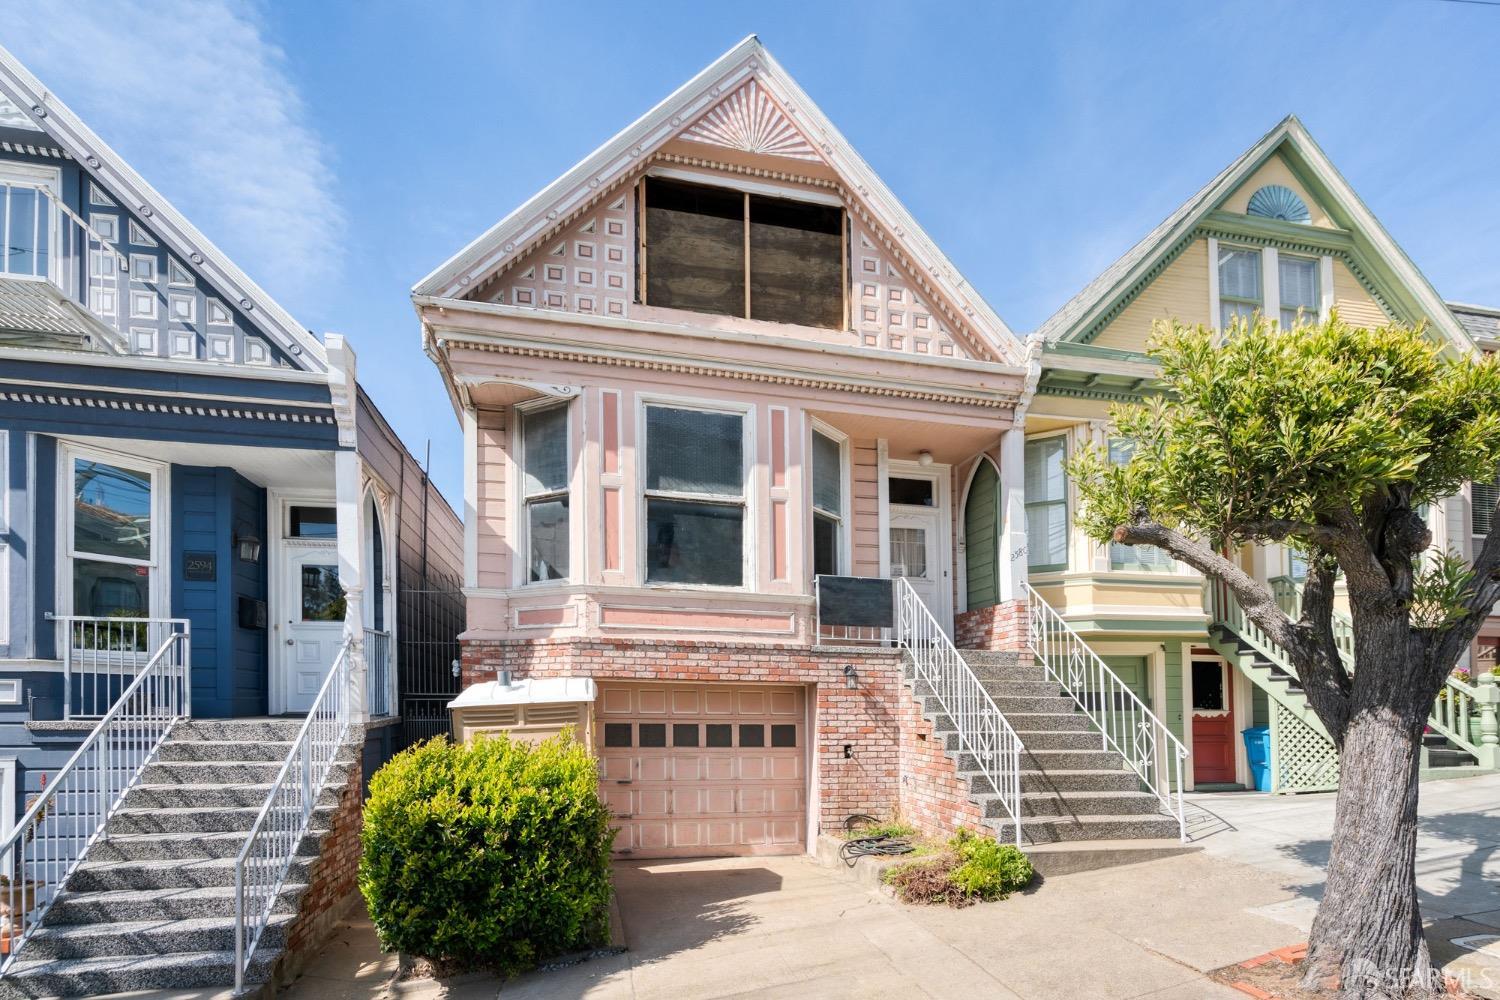 Photo of 2580 Mcallister St in San Francisco, CA